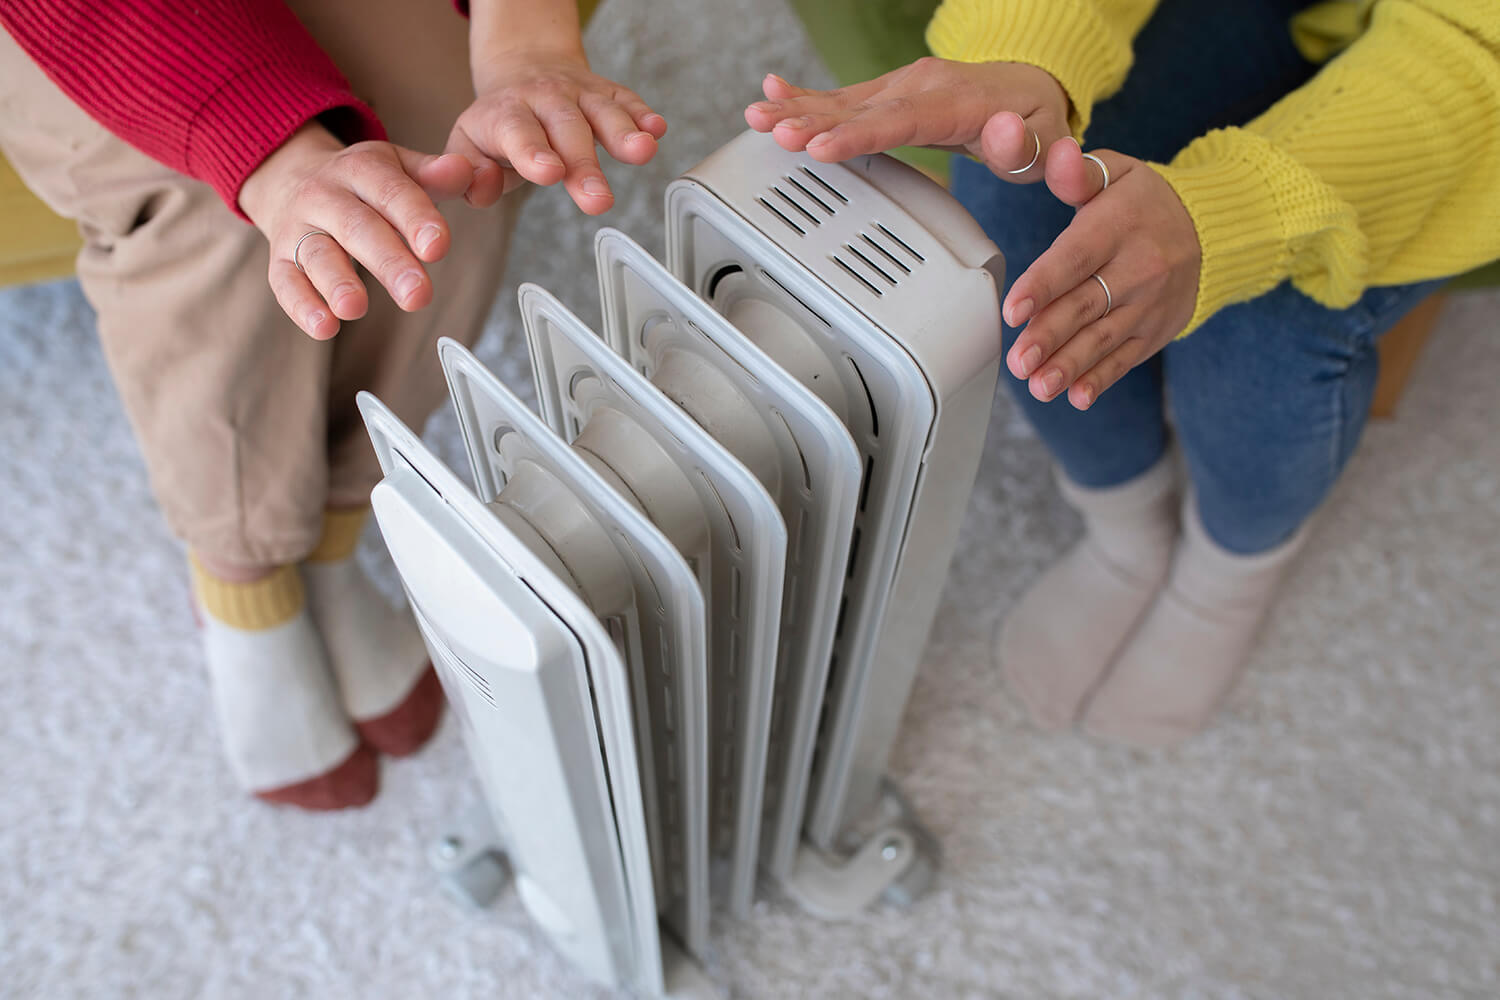 Lectured by the Heating, Ventilation in addition to A/C tech for bargain air filters